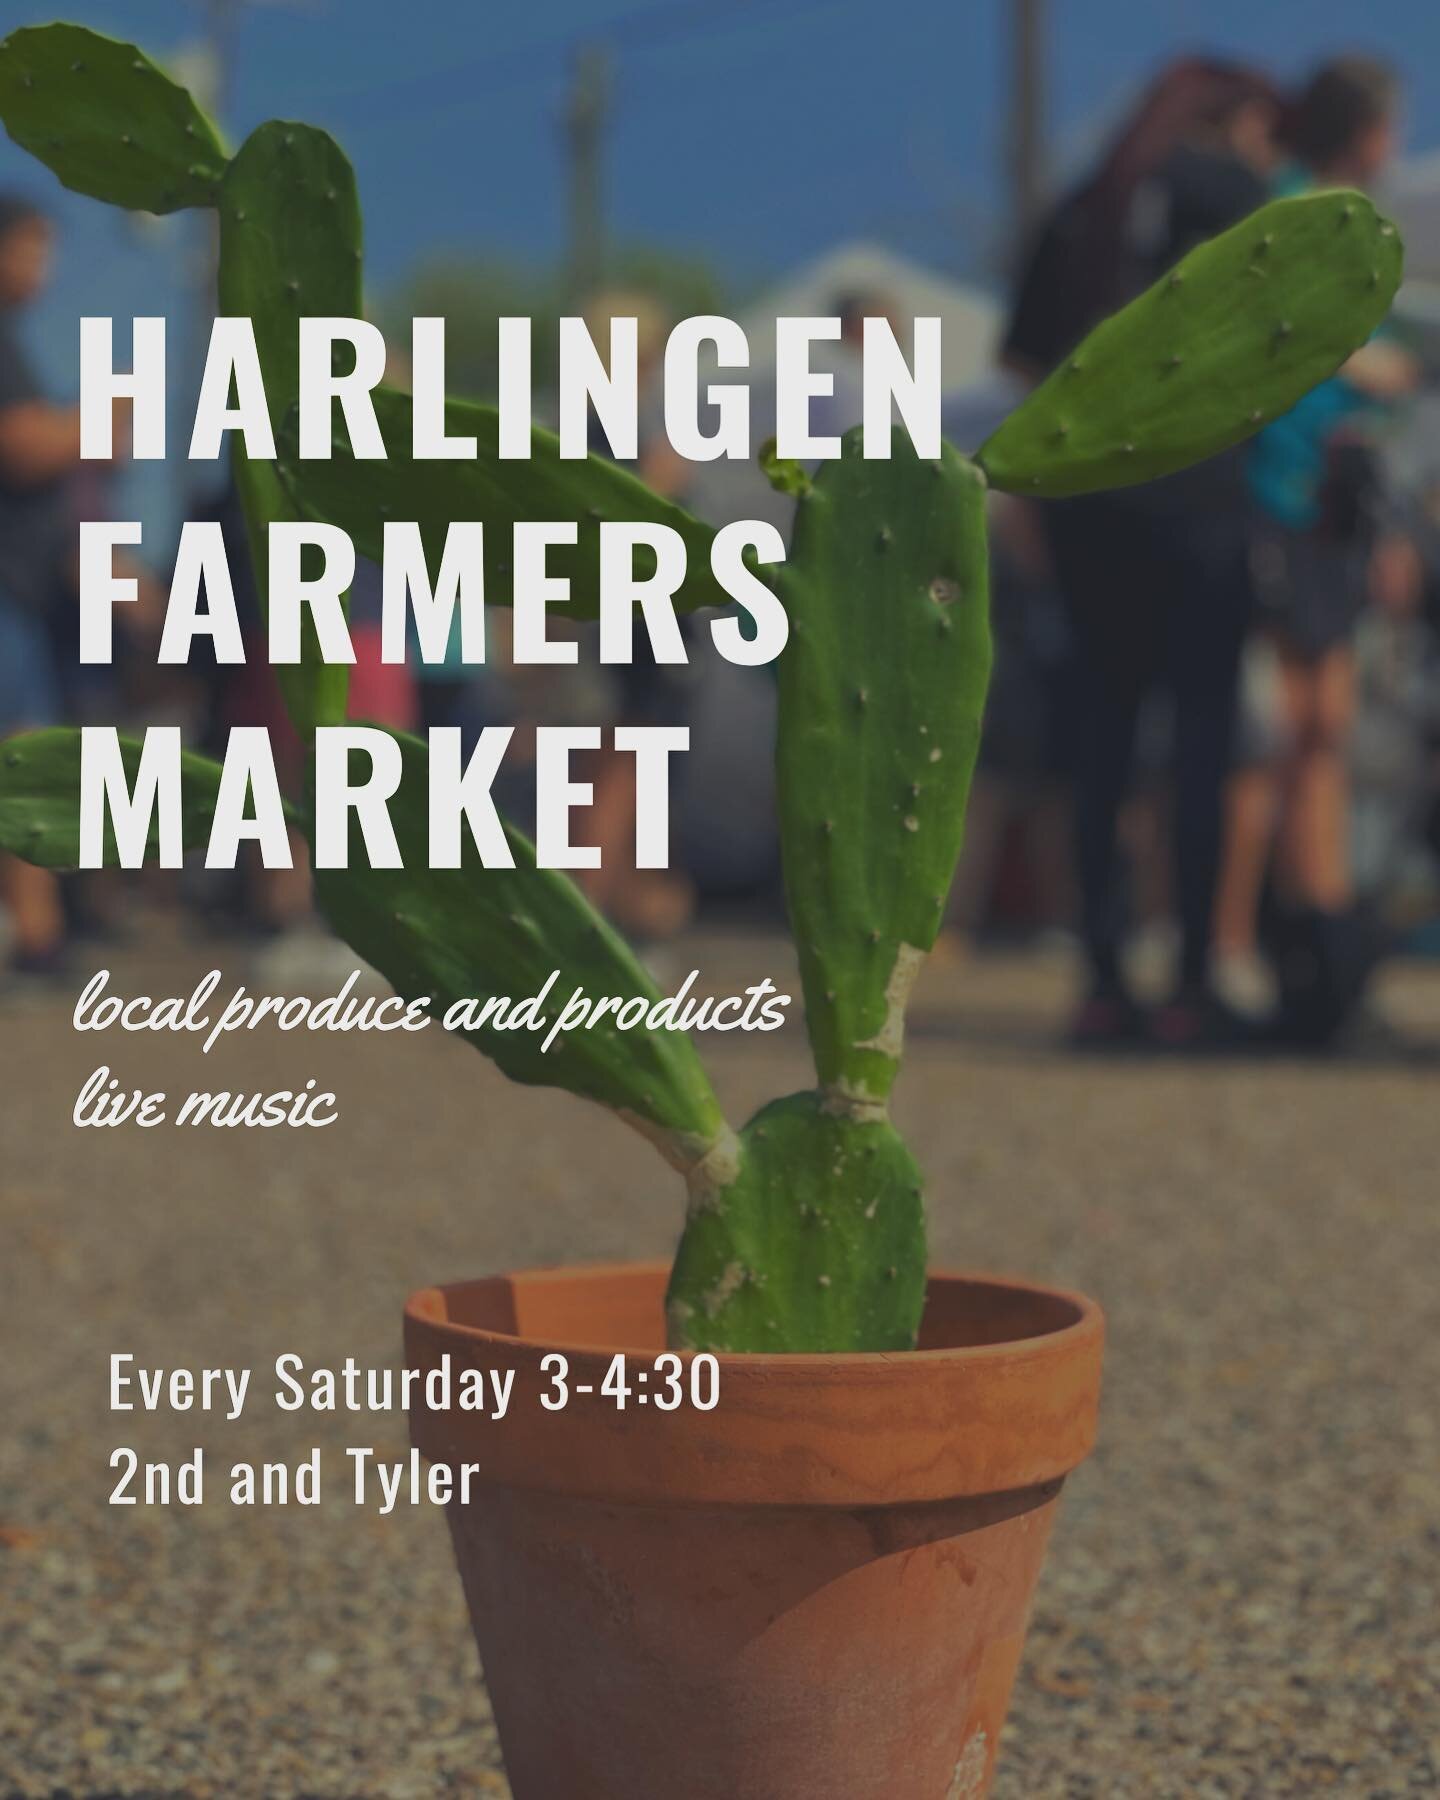 This Saturday! As always the Harlingen Farmers Market will have the best the valley has to offer from your local farmers and makers. 

Baked goods, native plants, natural soaps, local produce, strawberry lemonade from @salinasfamilyfarm,  vegan treat